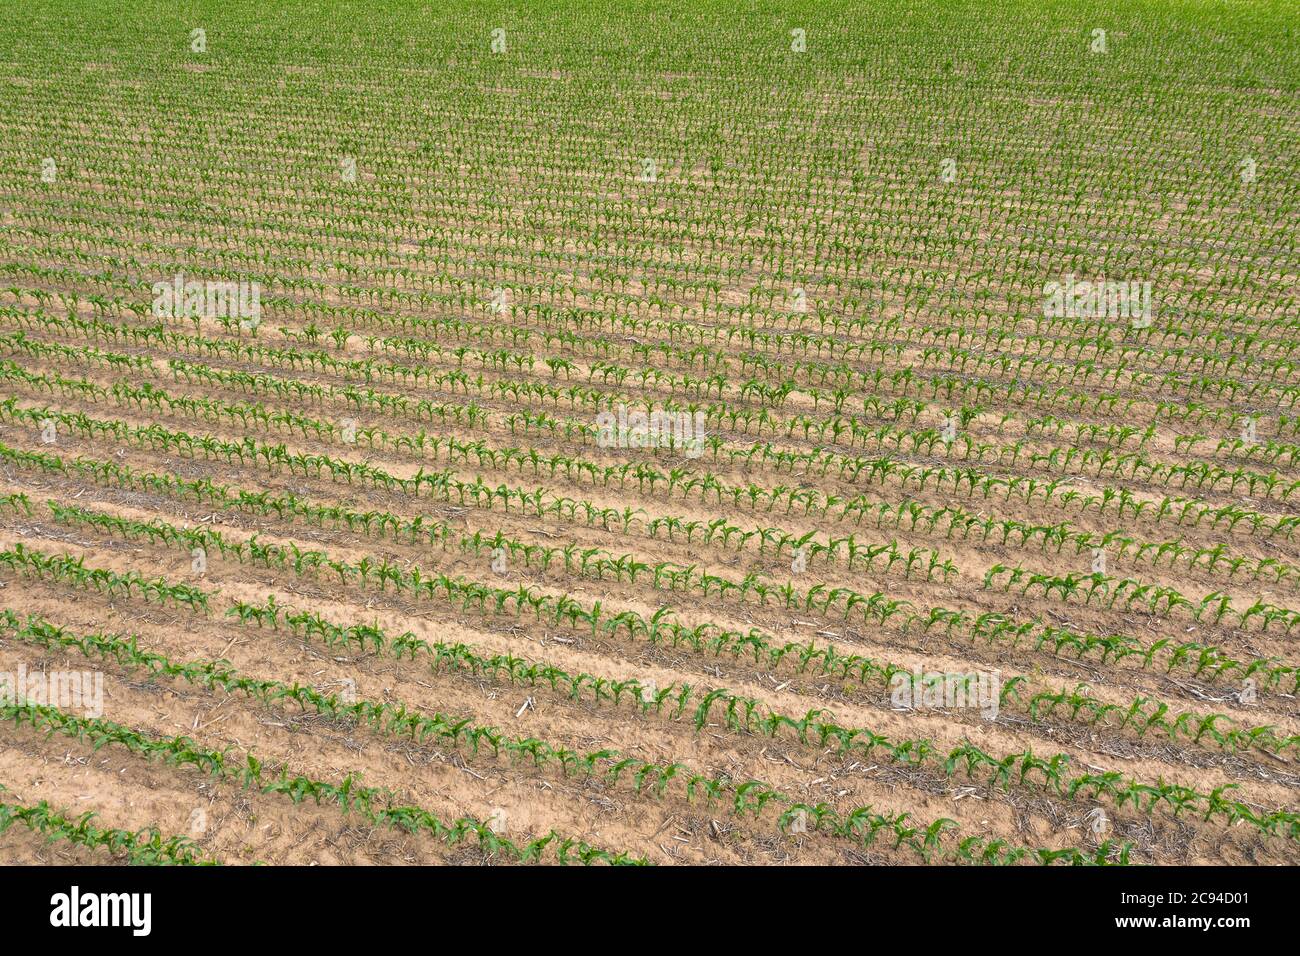 A drone image overlooking a newly growing crop of corn shows a classic farmland scene typical of the Midwest. Stock Photo